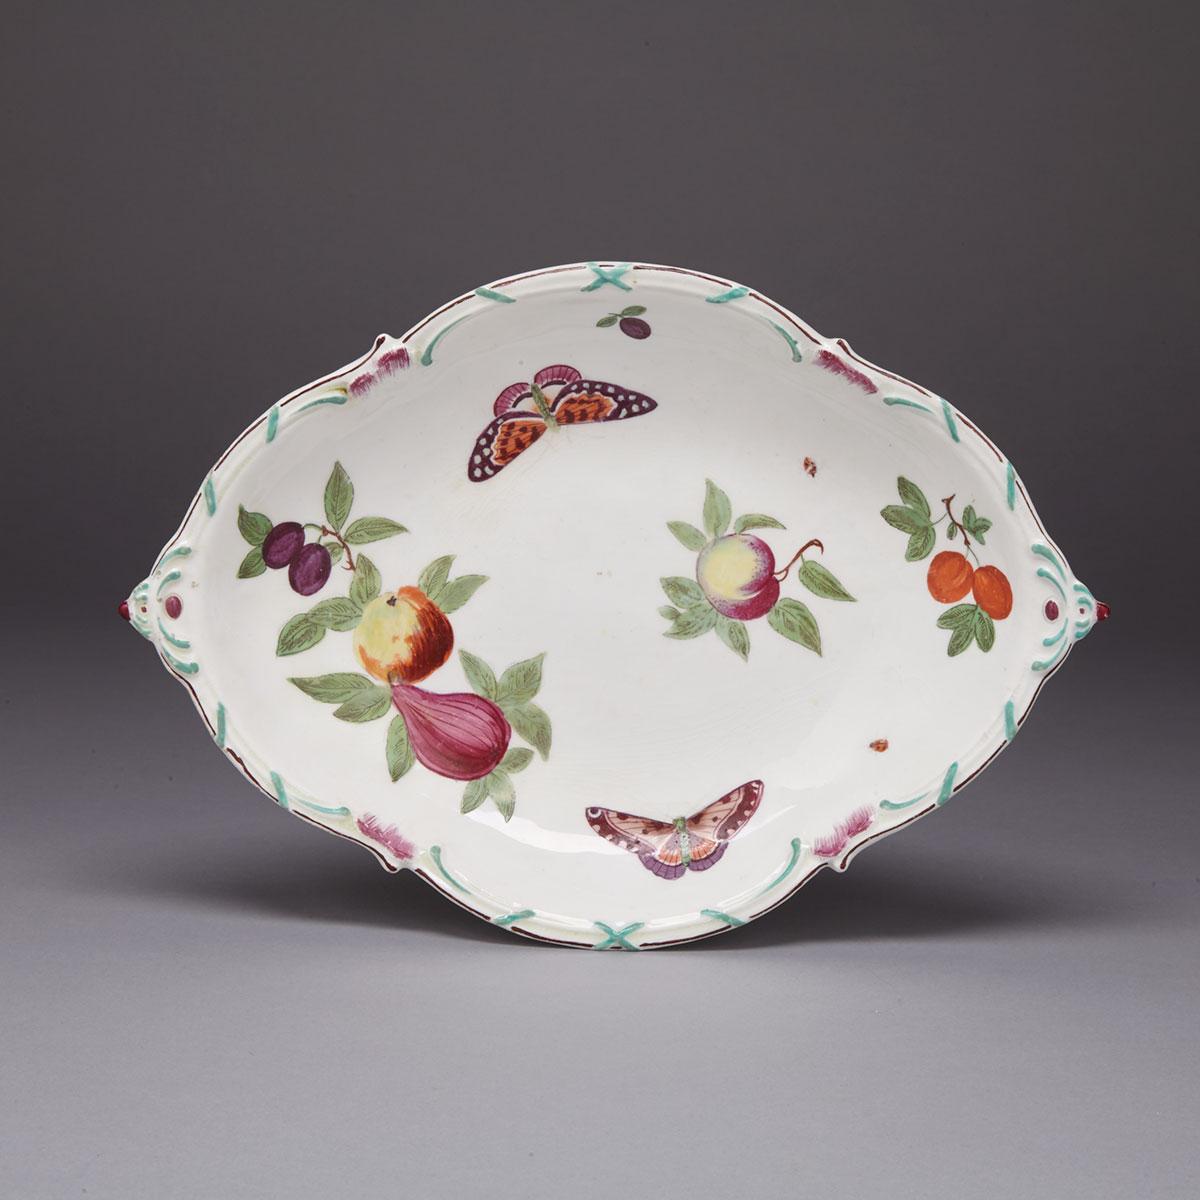 Chelsea Shaped Oval Dish, c.1760-65